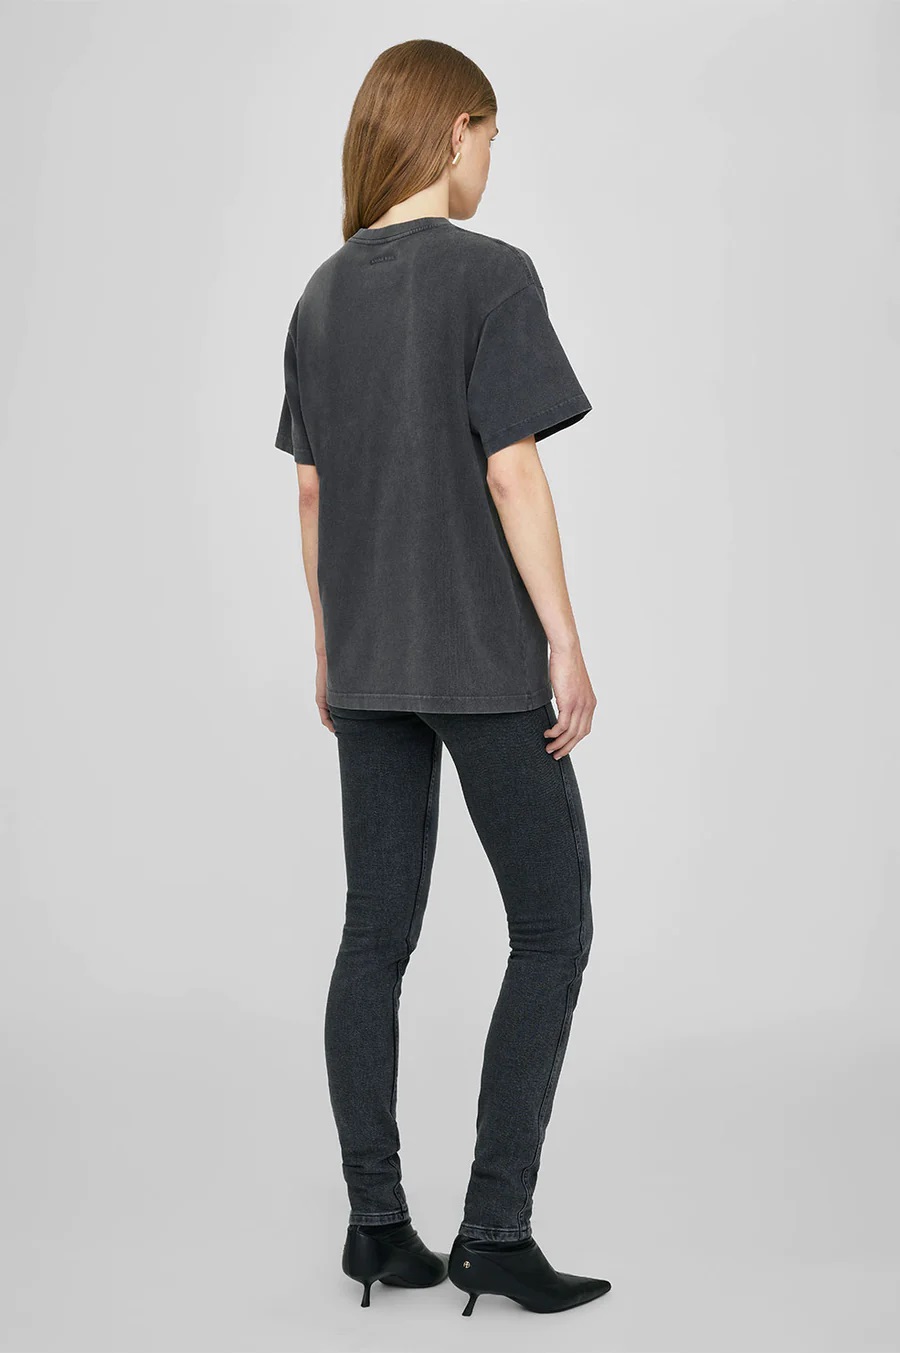 ANINE BING Bolt Tee in Washed Black L